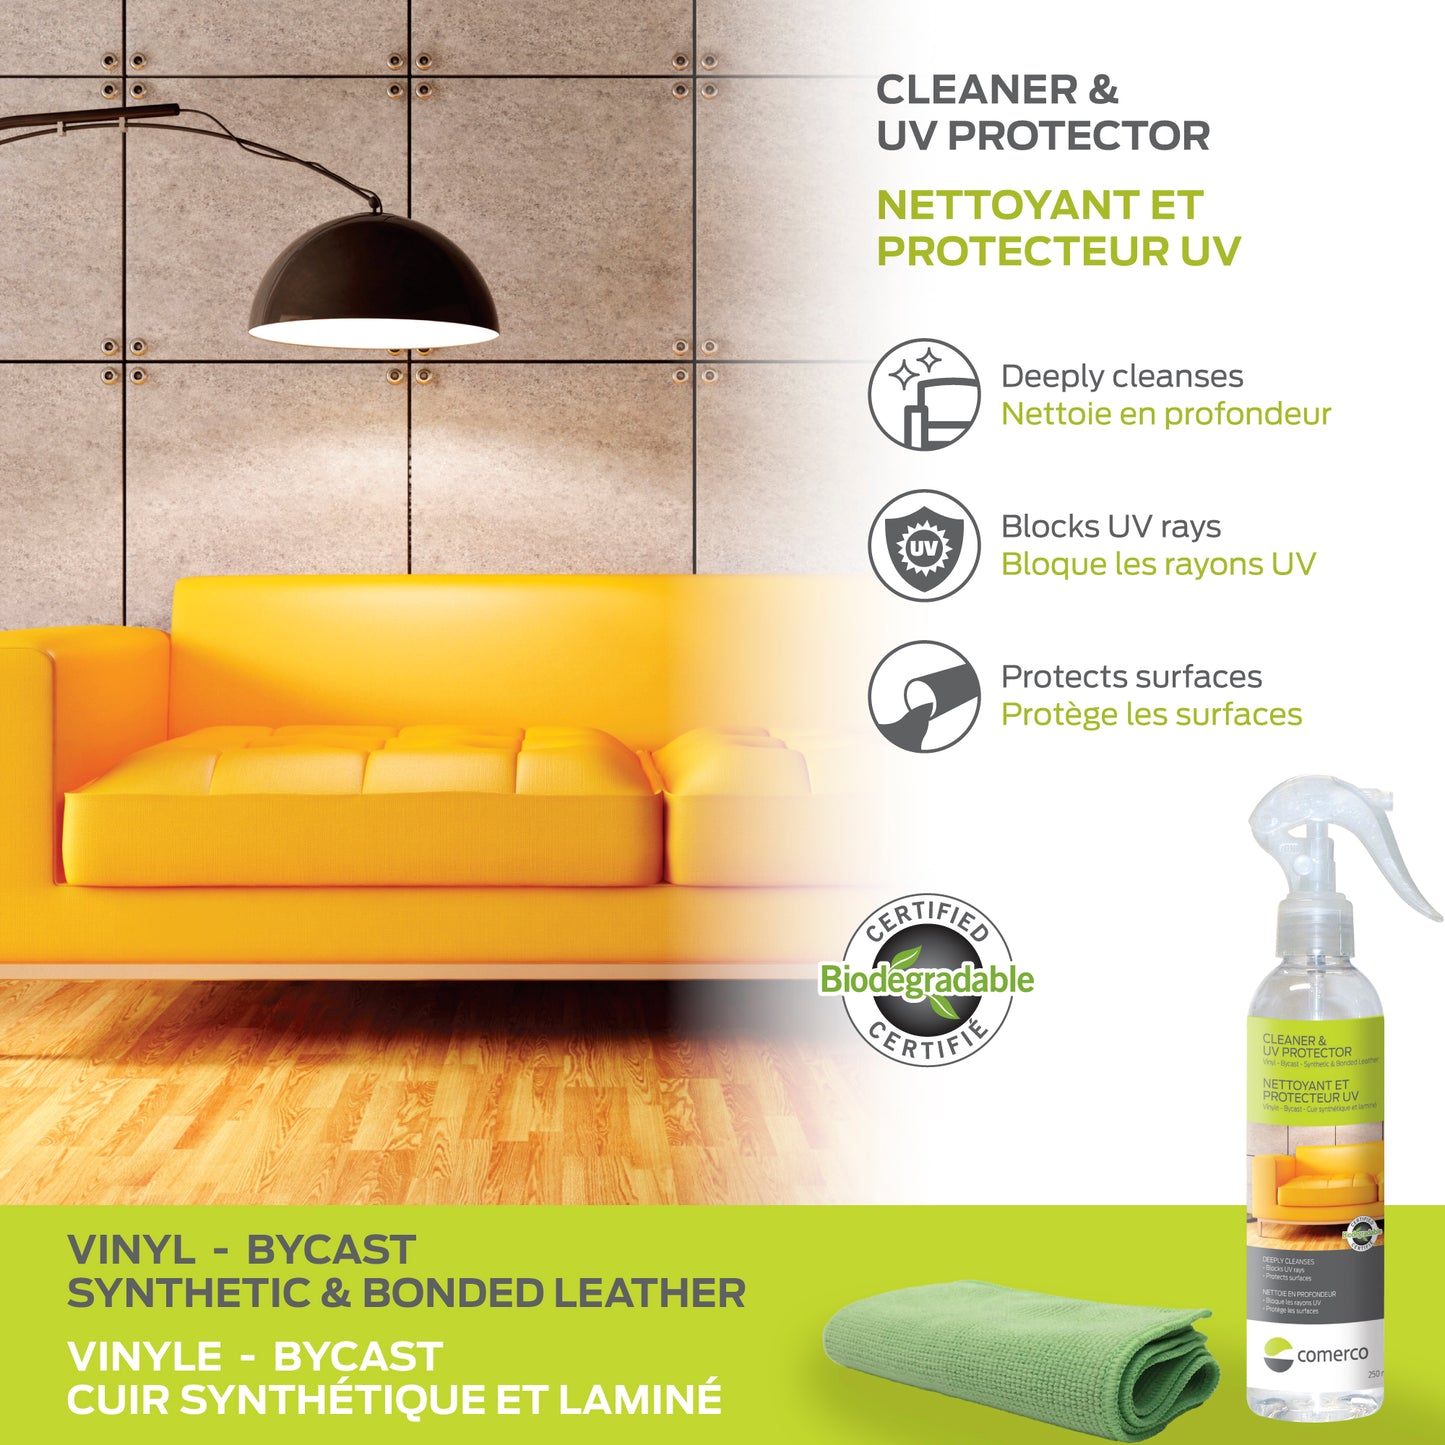 Furniture Cleaning Kit - Fabric, Leather, Vinyl, and More - 4 x 250 mL 